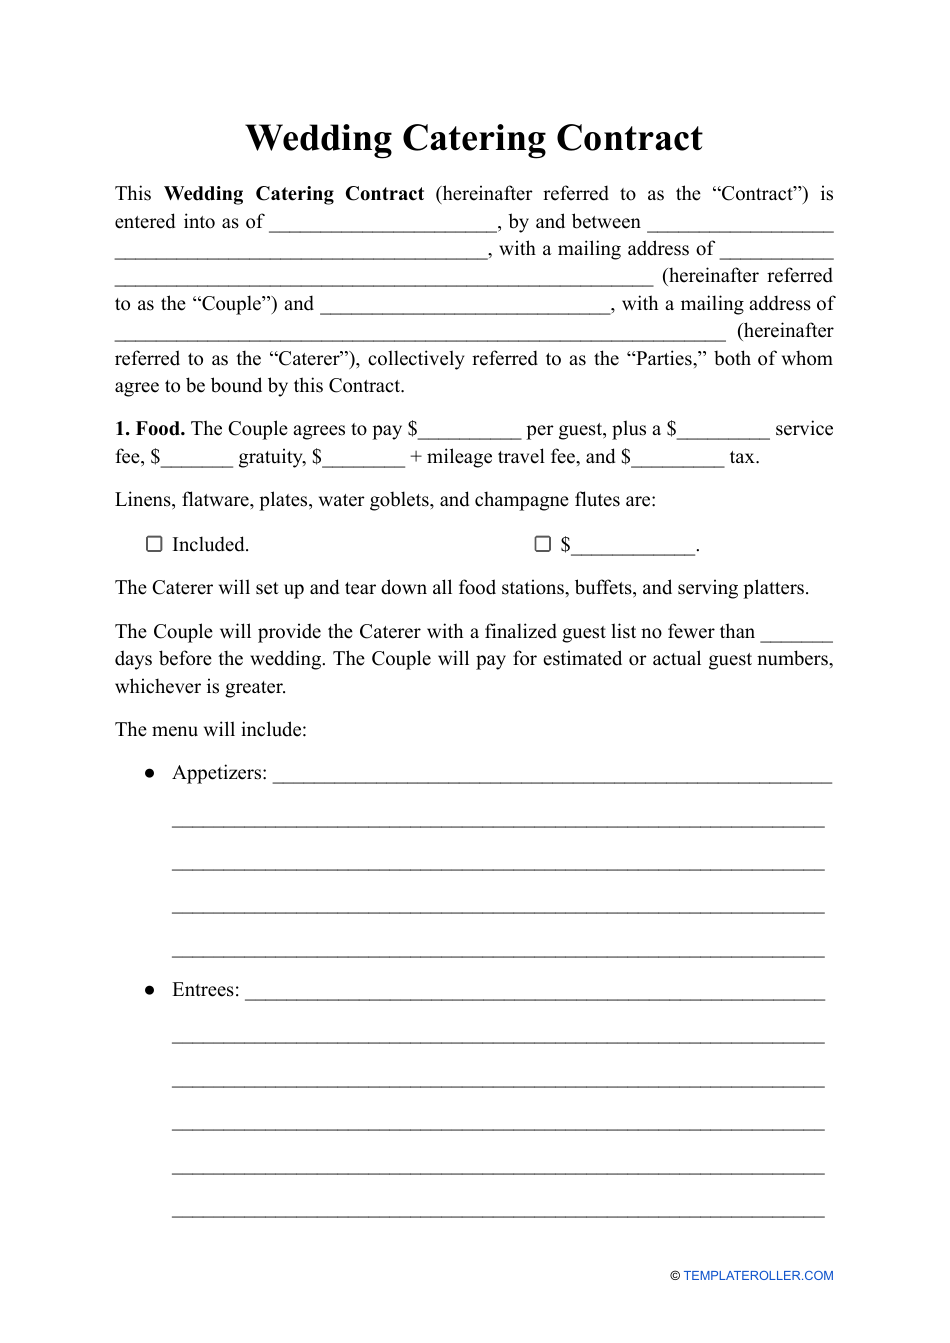 Wedding Catering Contract Template, Page 1